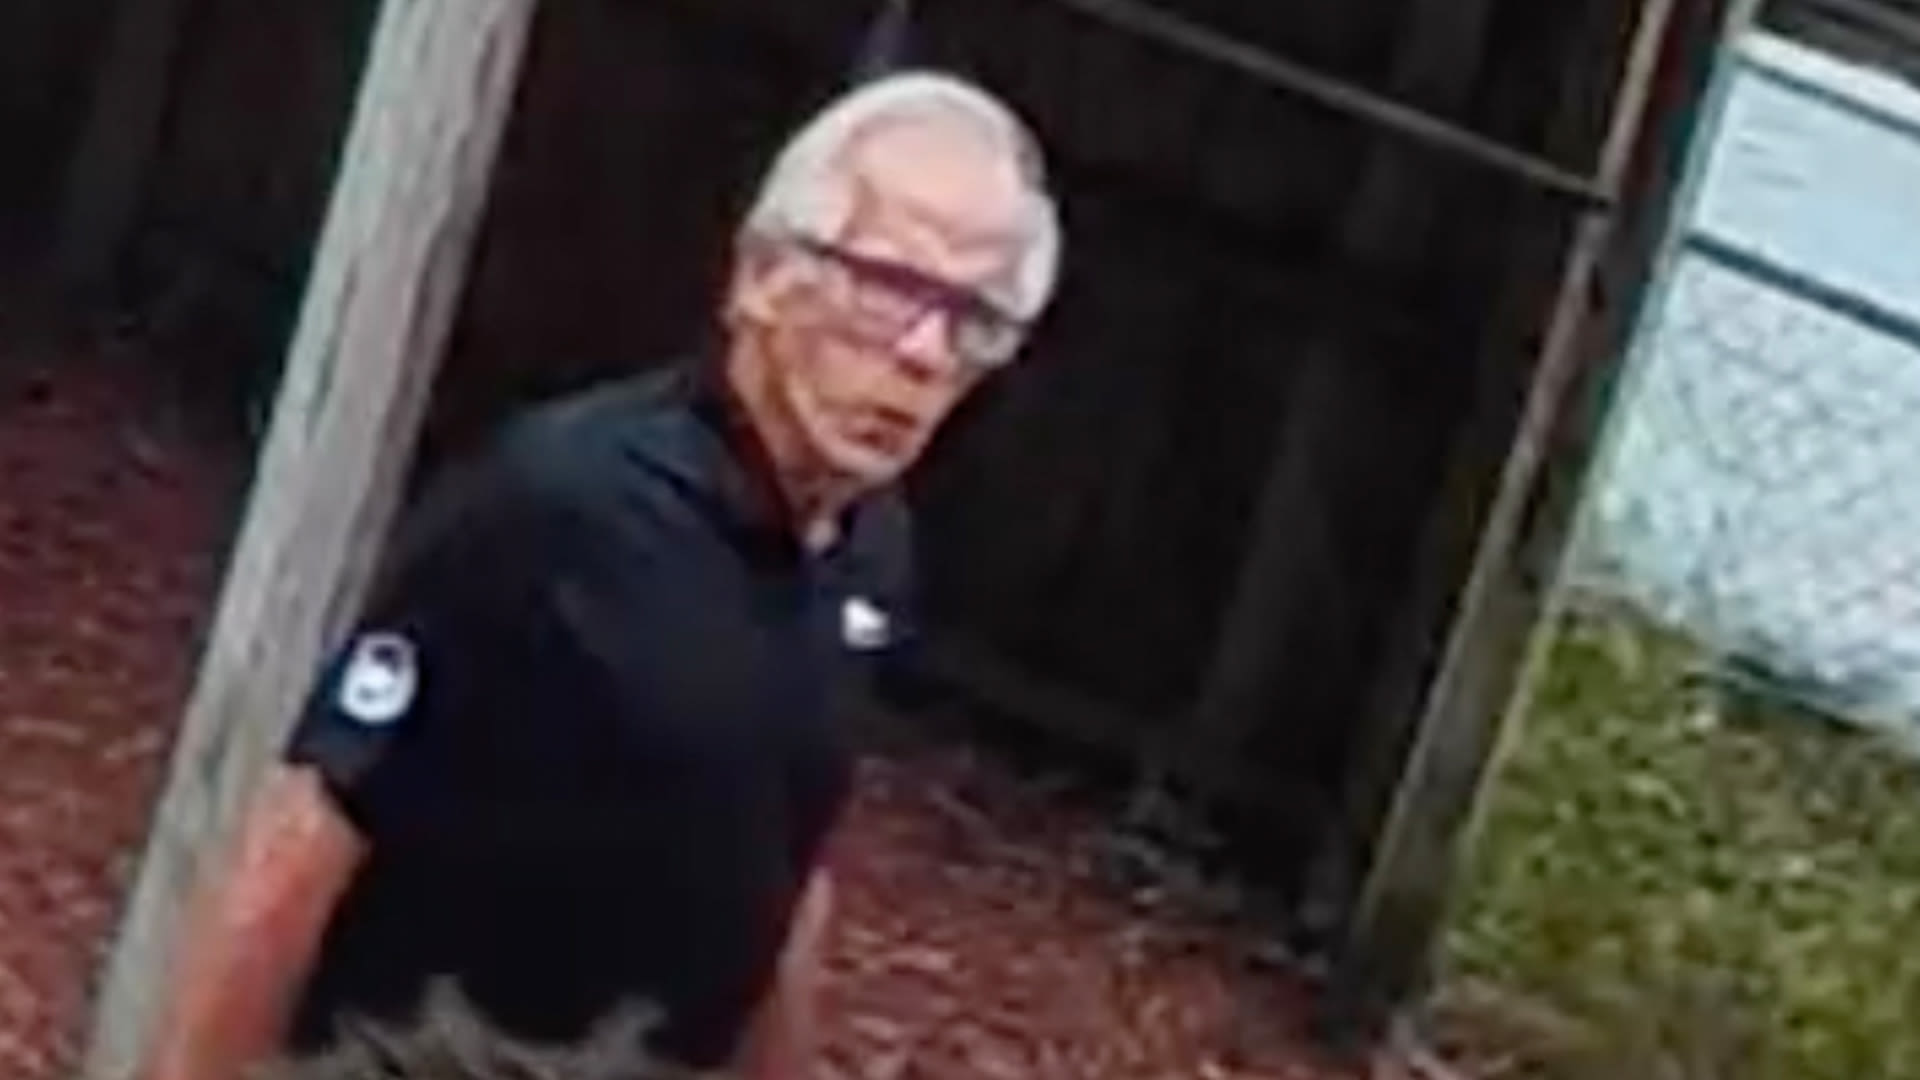 I caught a 'time traveler' sneaking into my shed - he aged decades in 24 hours